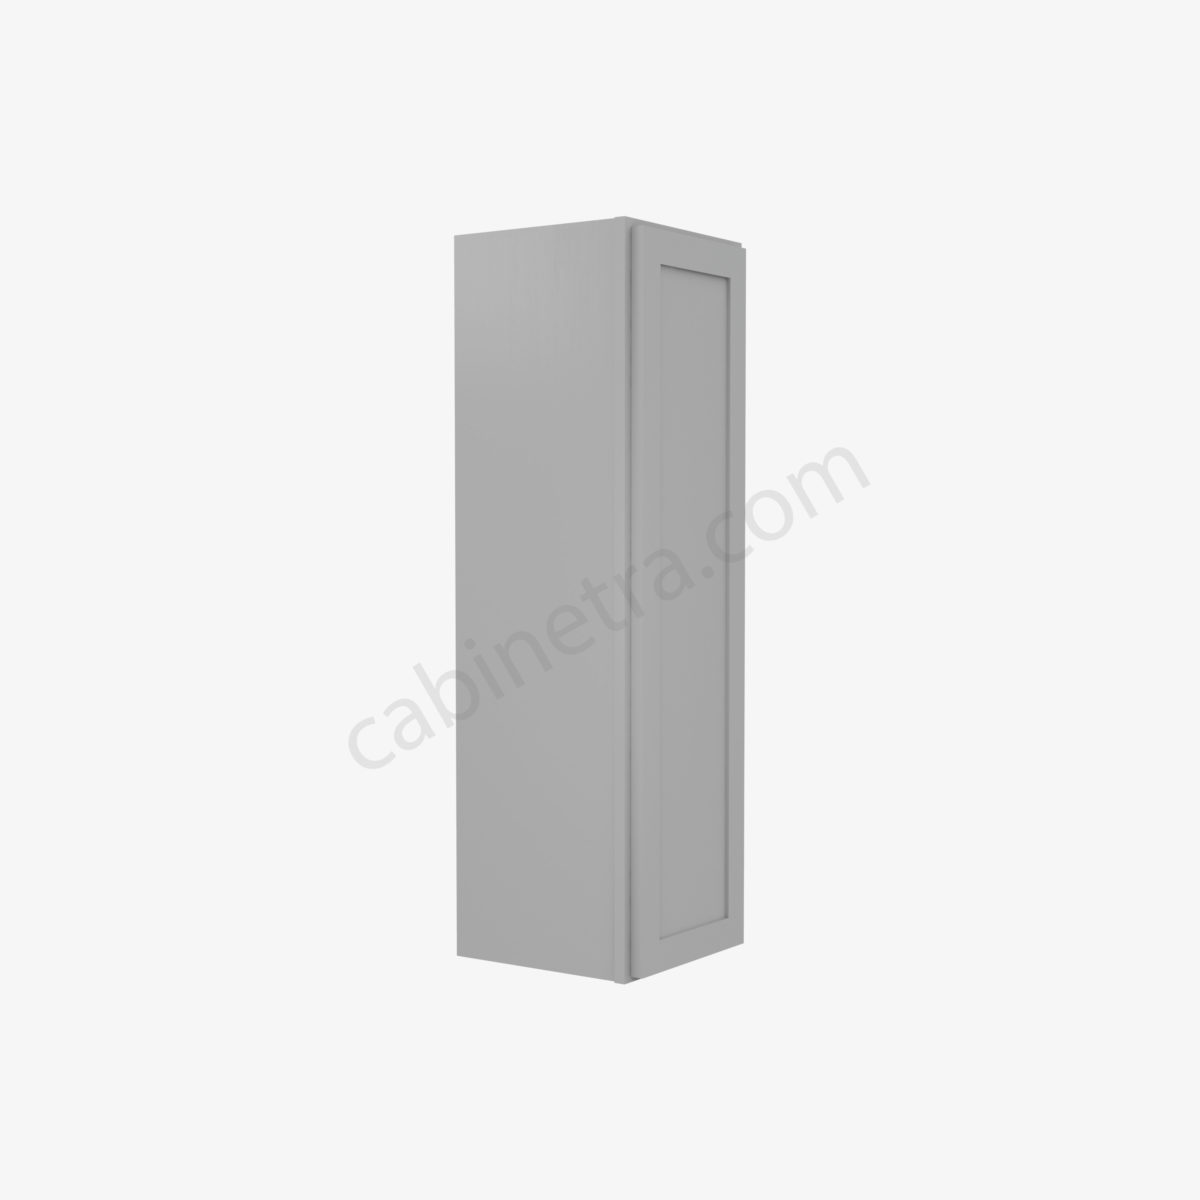 AB W1242 4 Forevermark Lait Gray Shaker Cabinetra scaled